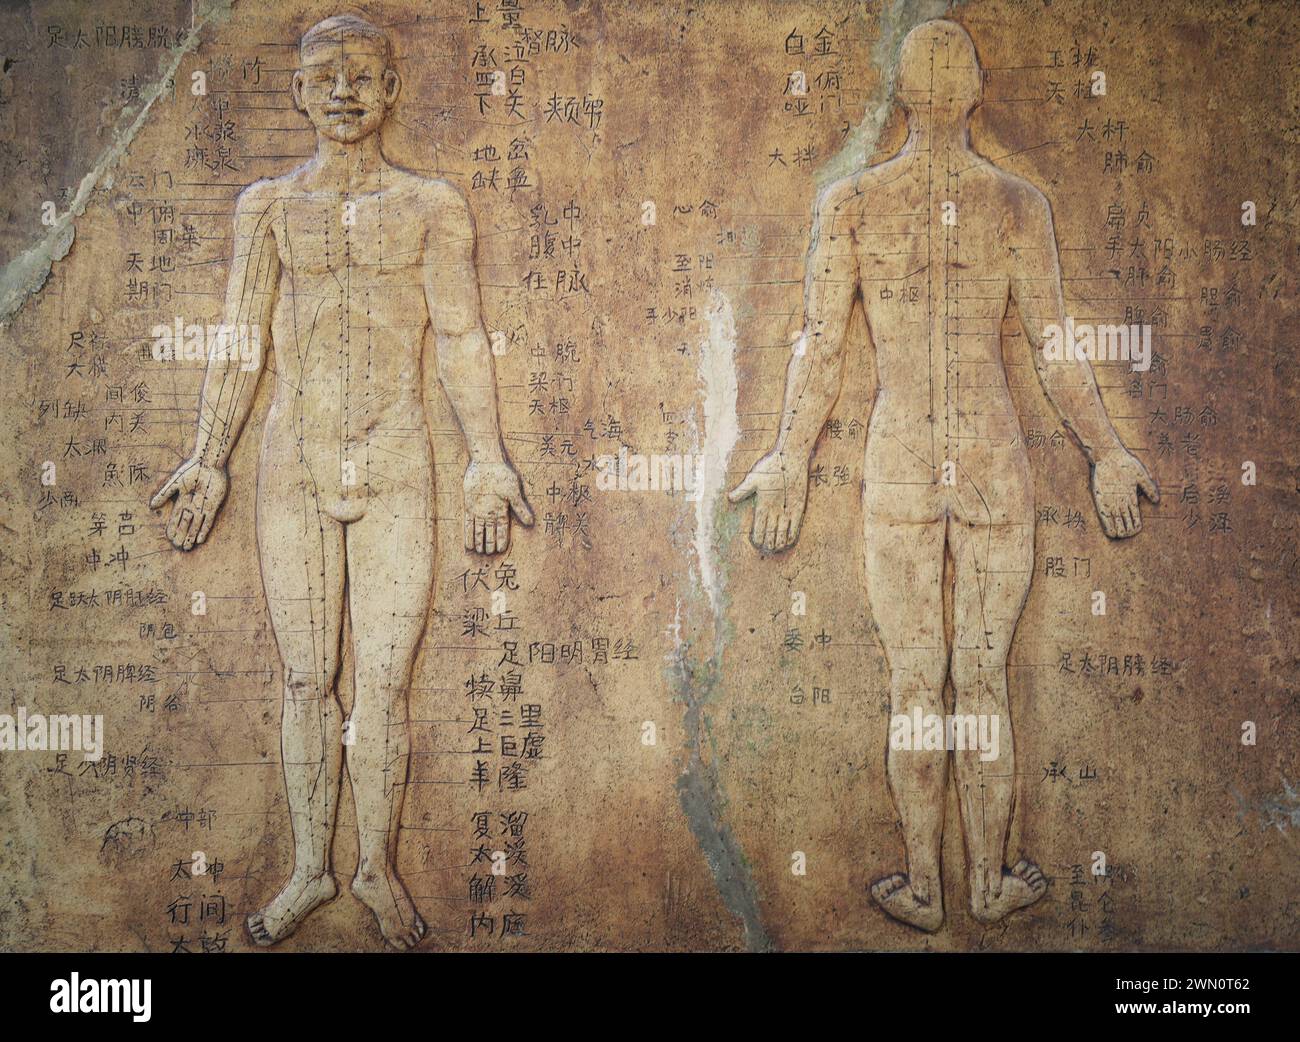 Anatomy guide. human skeletal map with explanations ancient chinese medicine Stock Photo